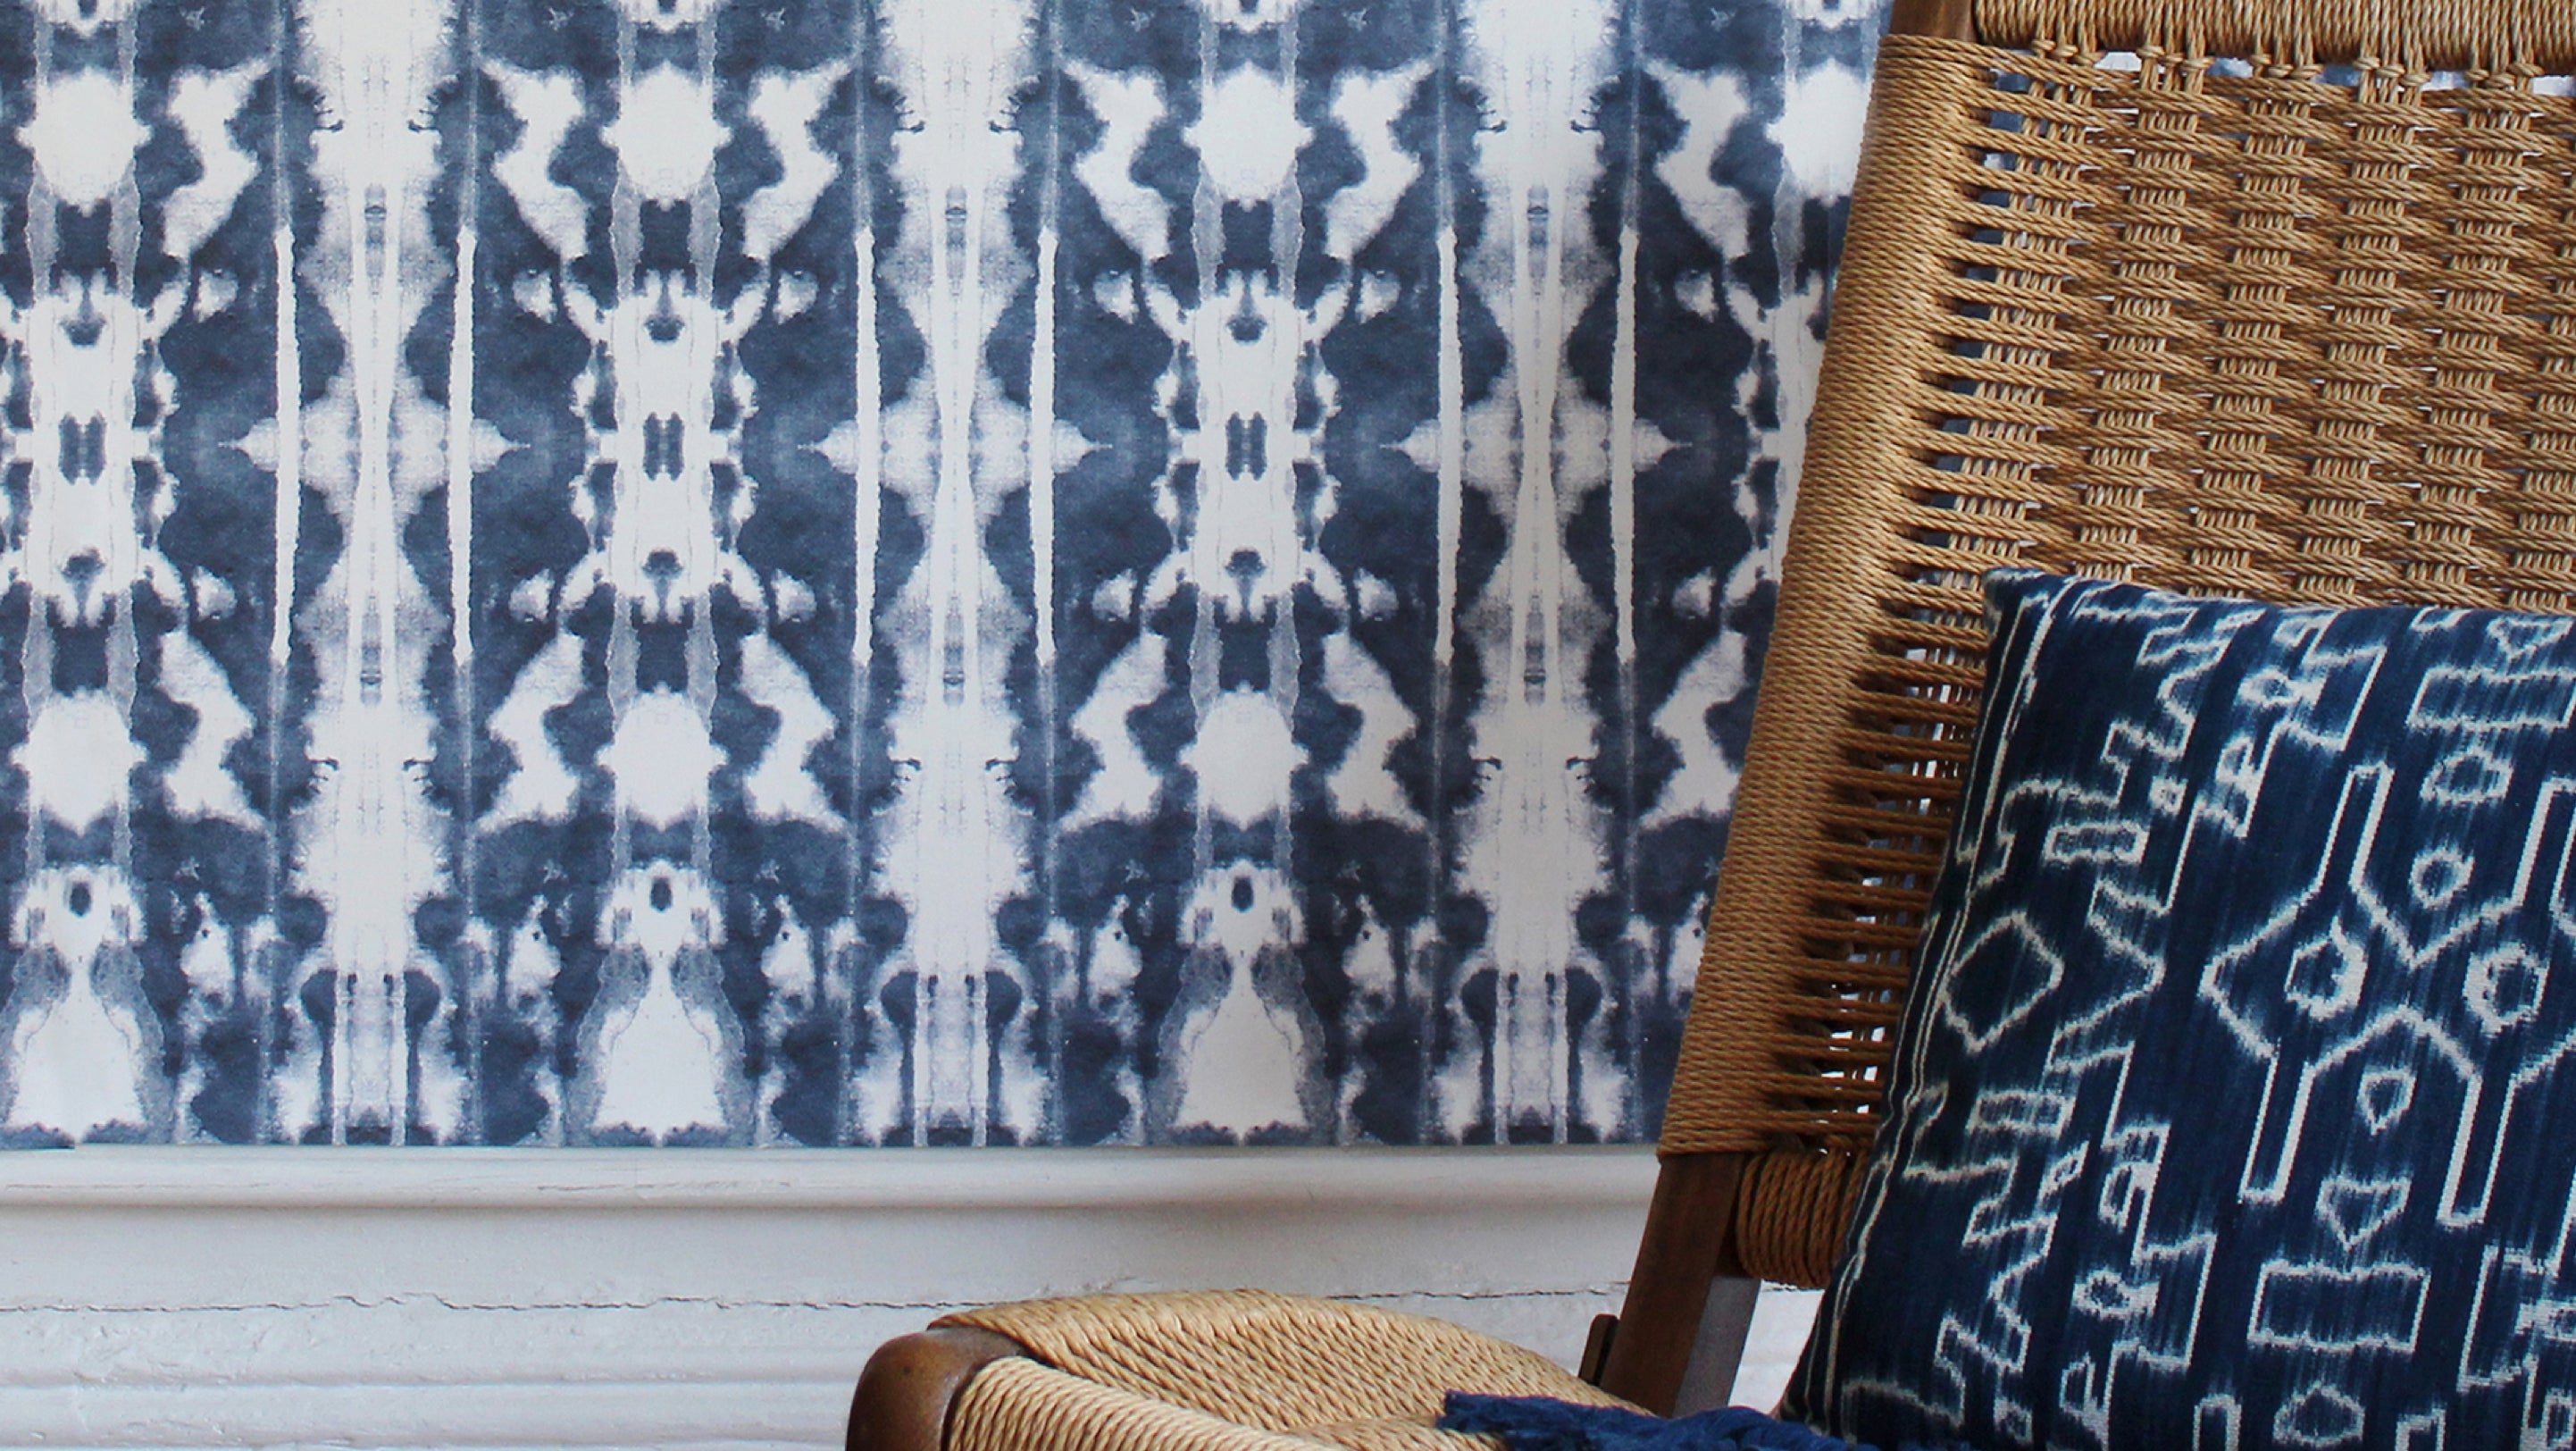 A wicker chair in front of a blue and white patterned wallpaper